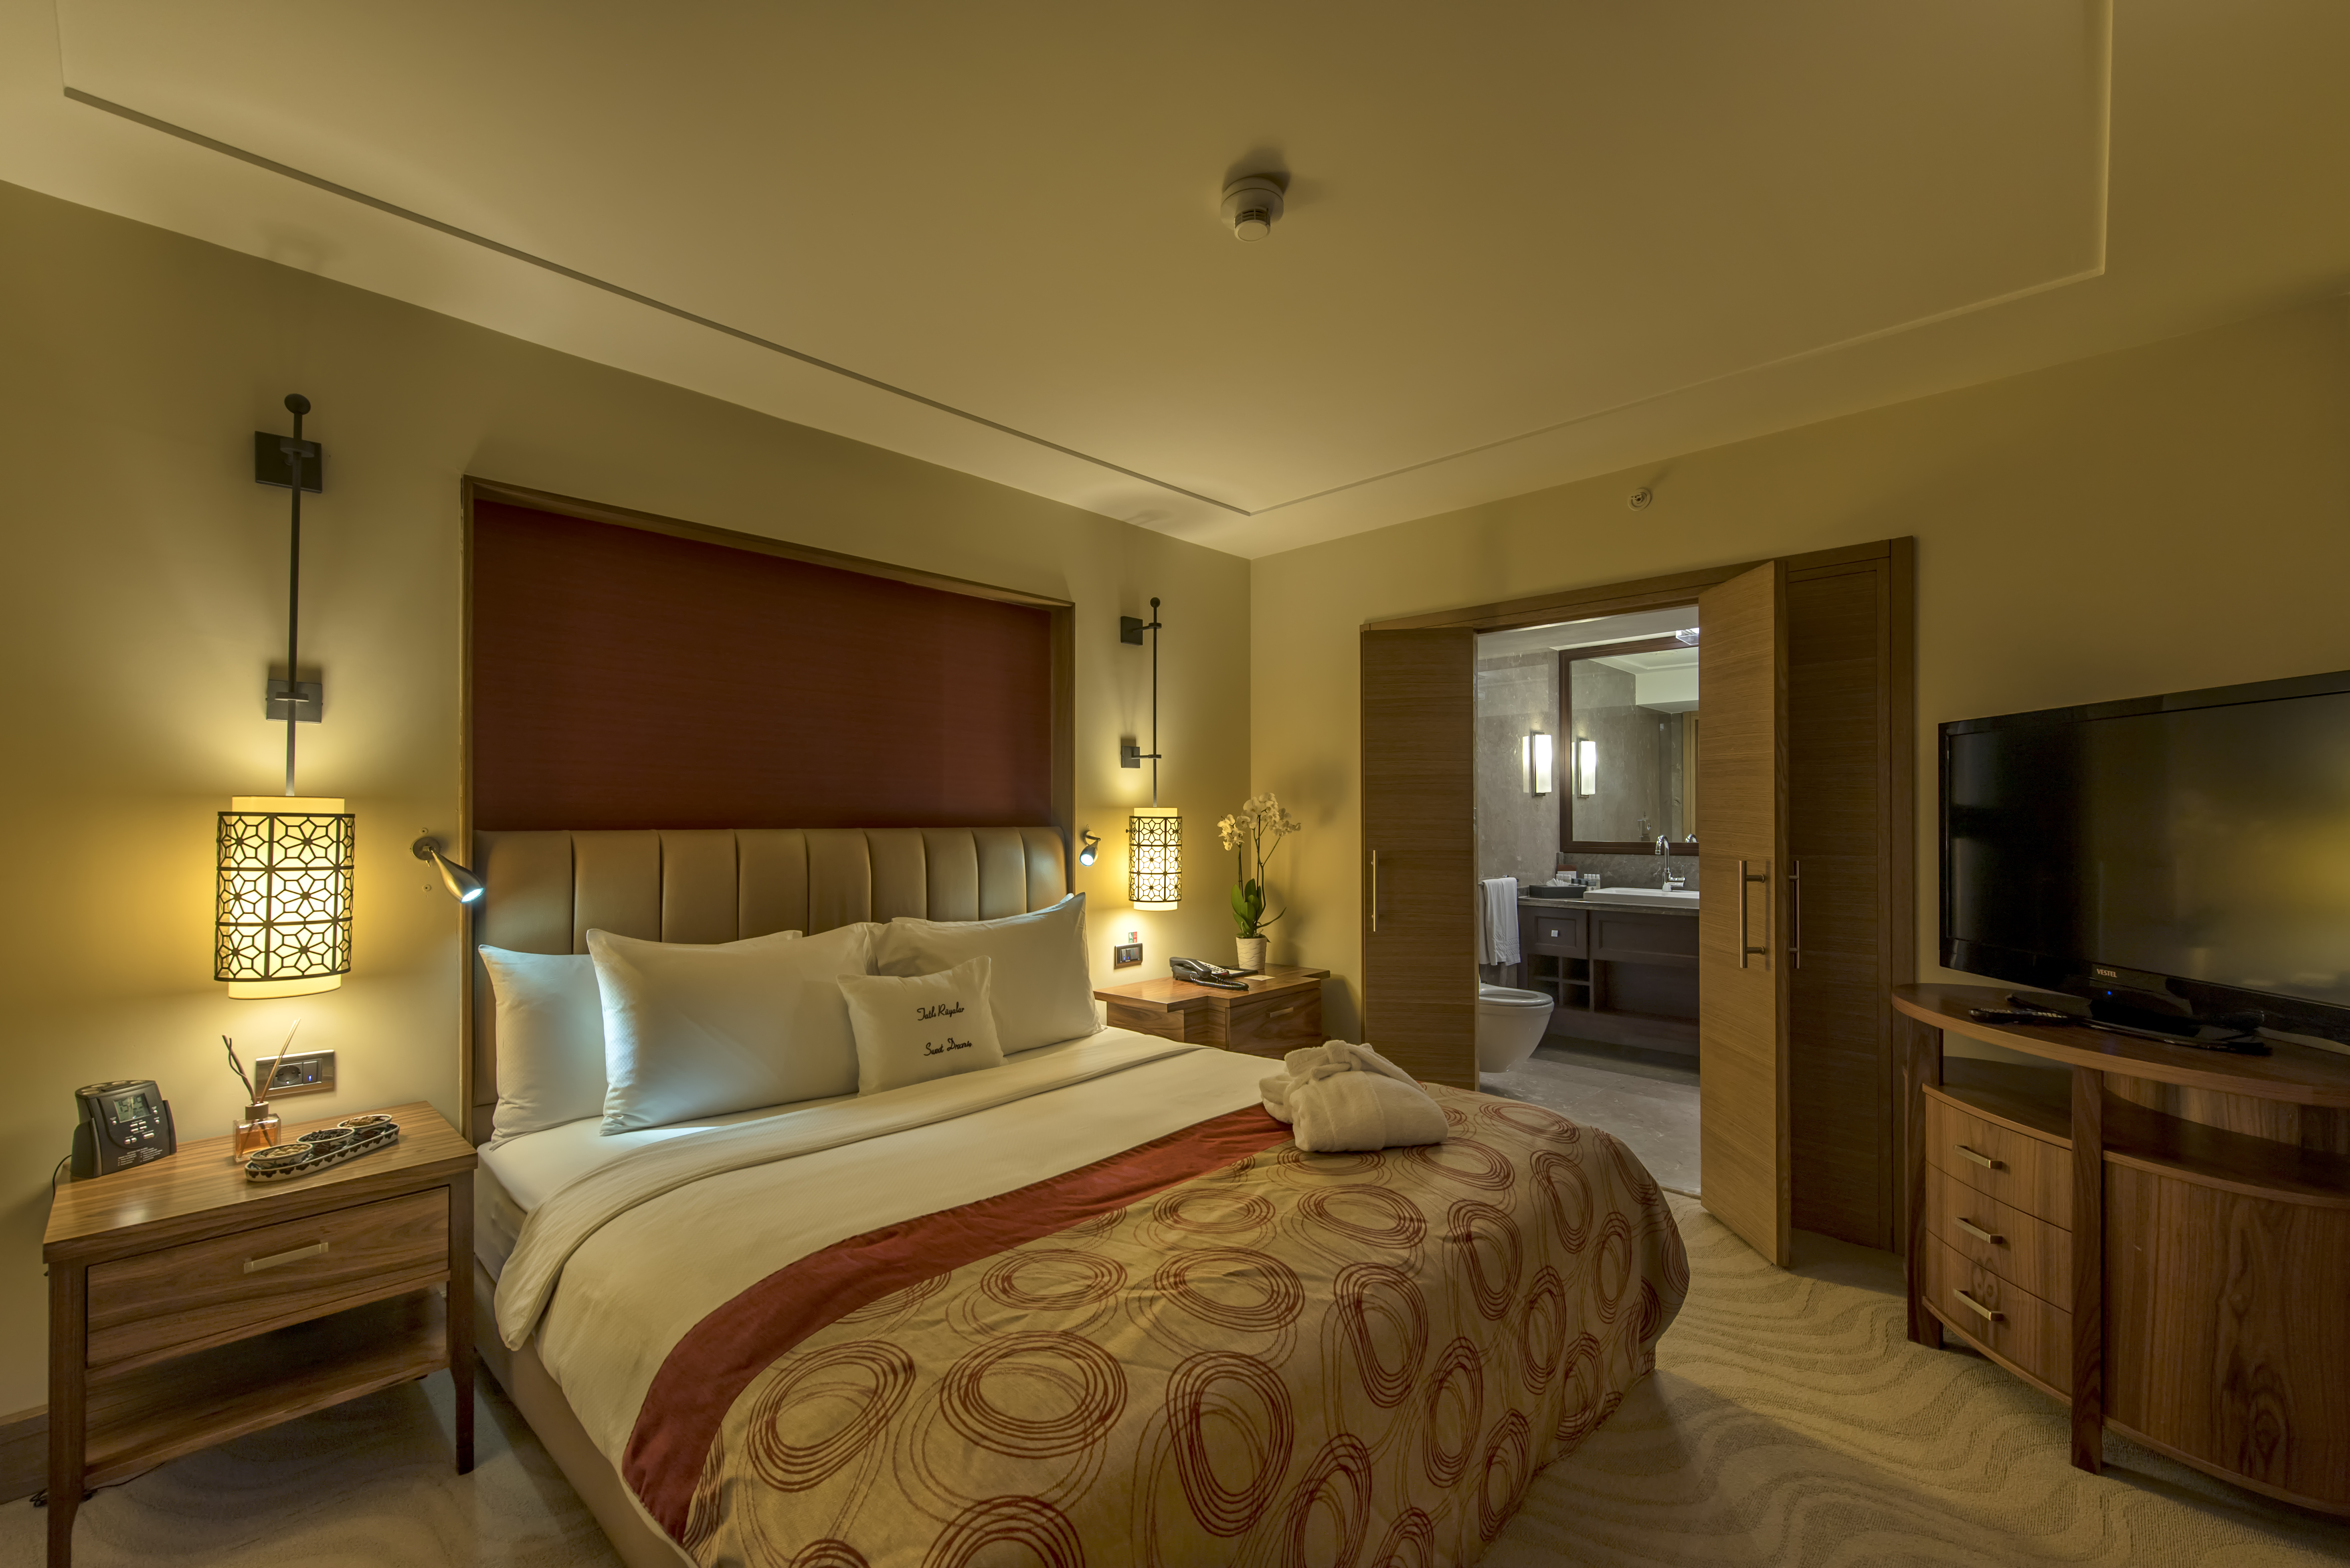 Bed, Illuminated Lamps Above Bedside Tables, Open Doorway to Bathroom, Dresser and TV in Suite 